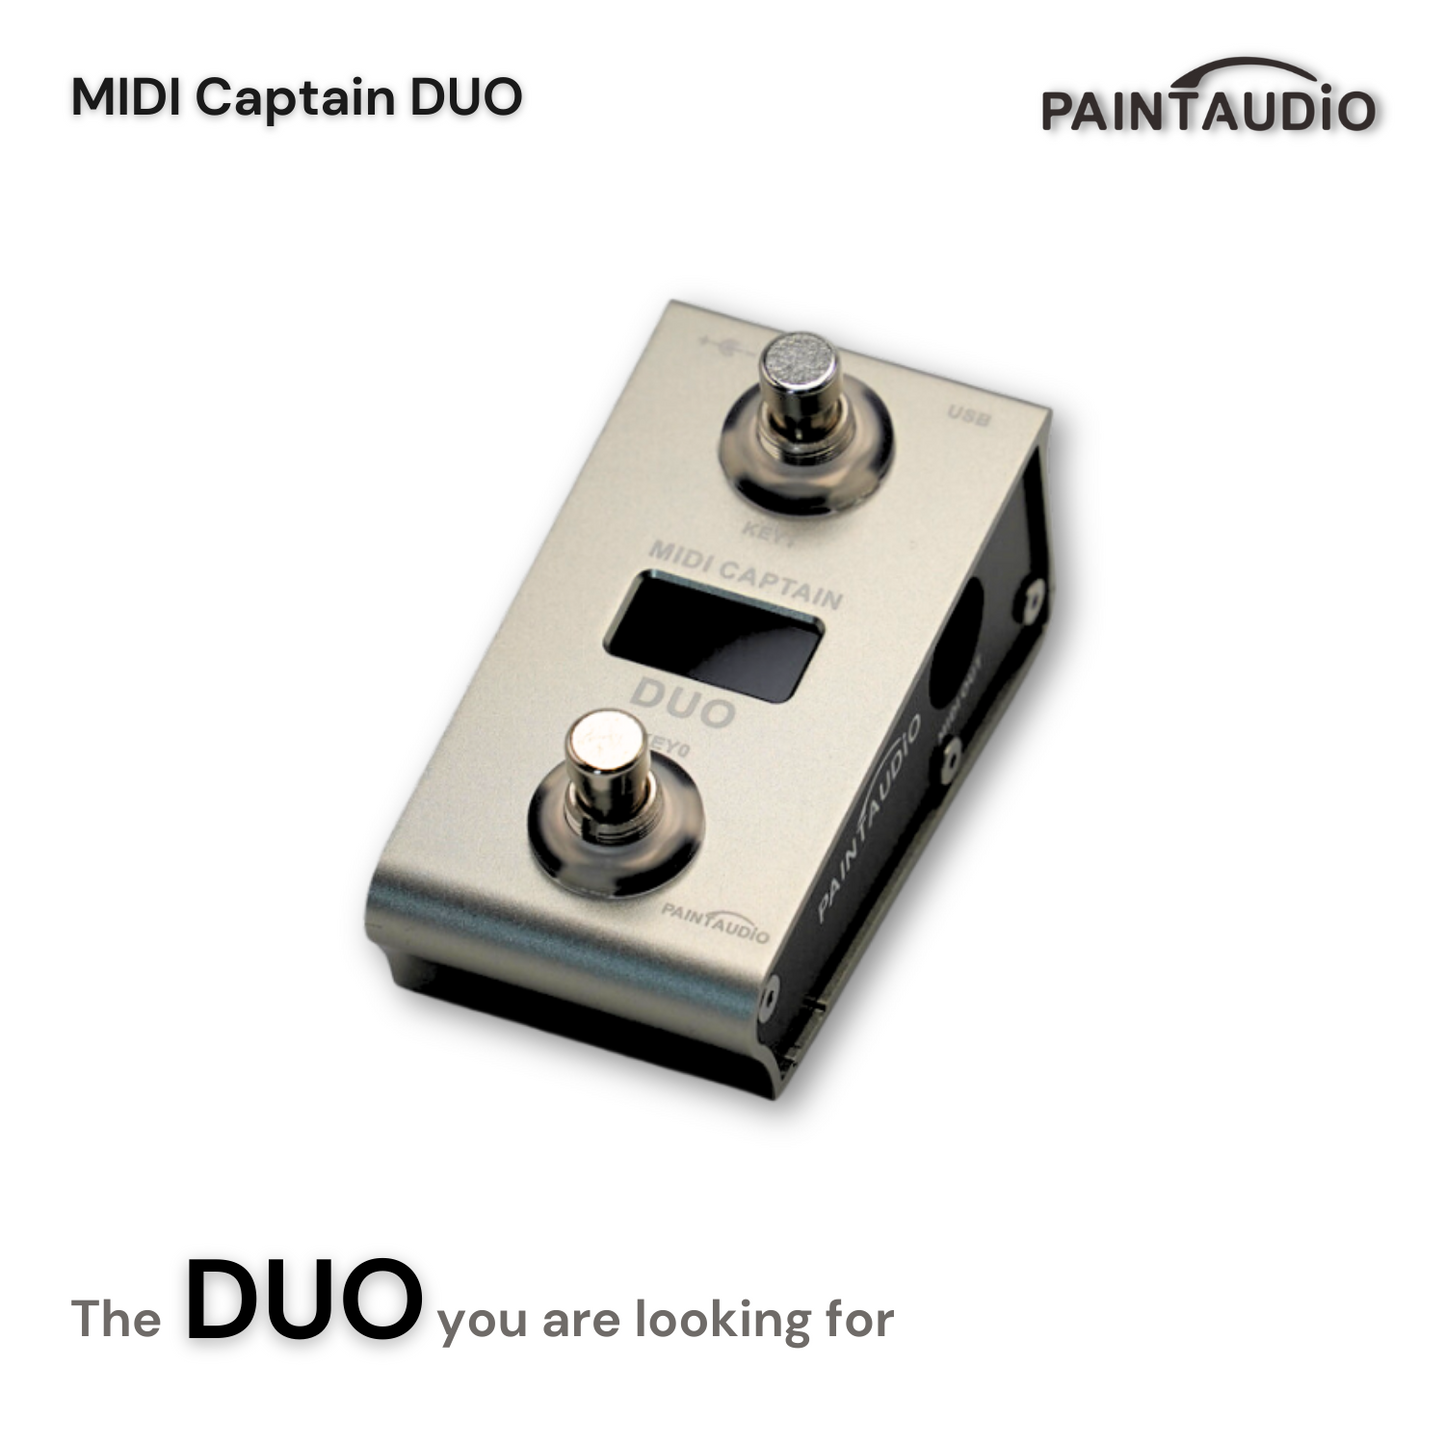 MIDI Captain DUO Controller with HID Multi-state Cycling